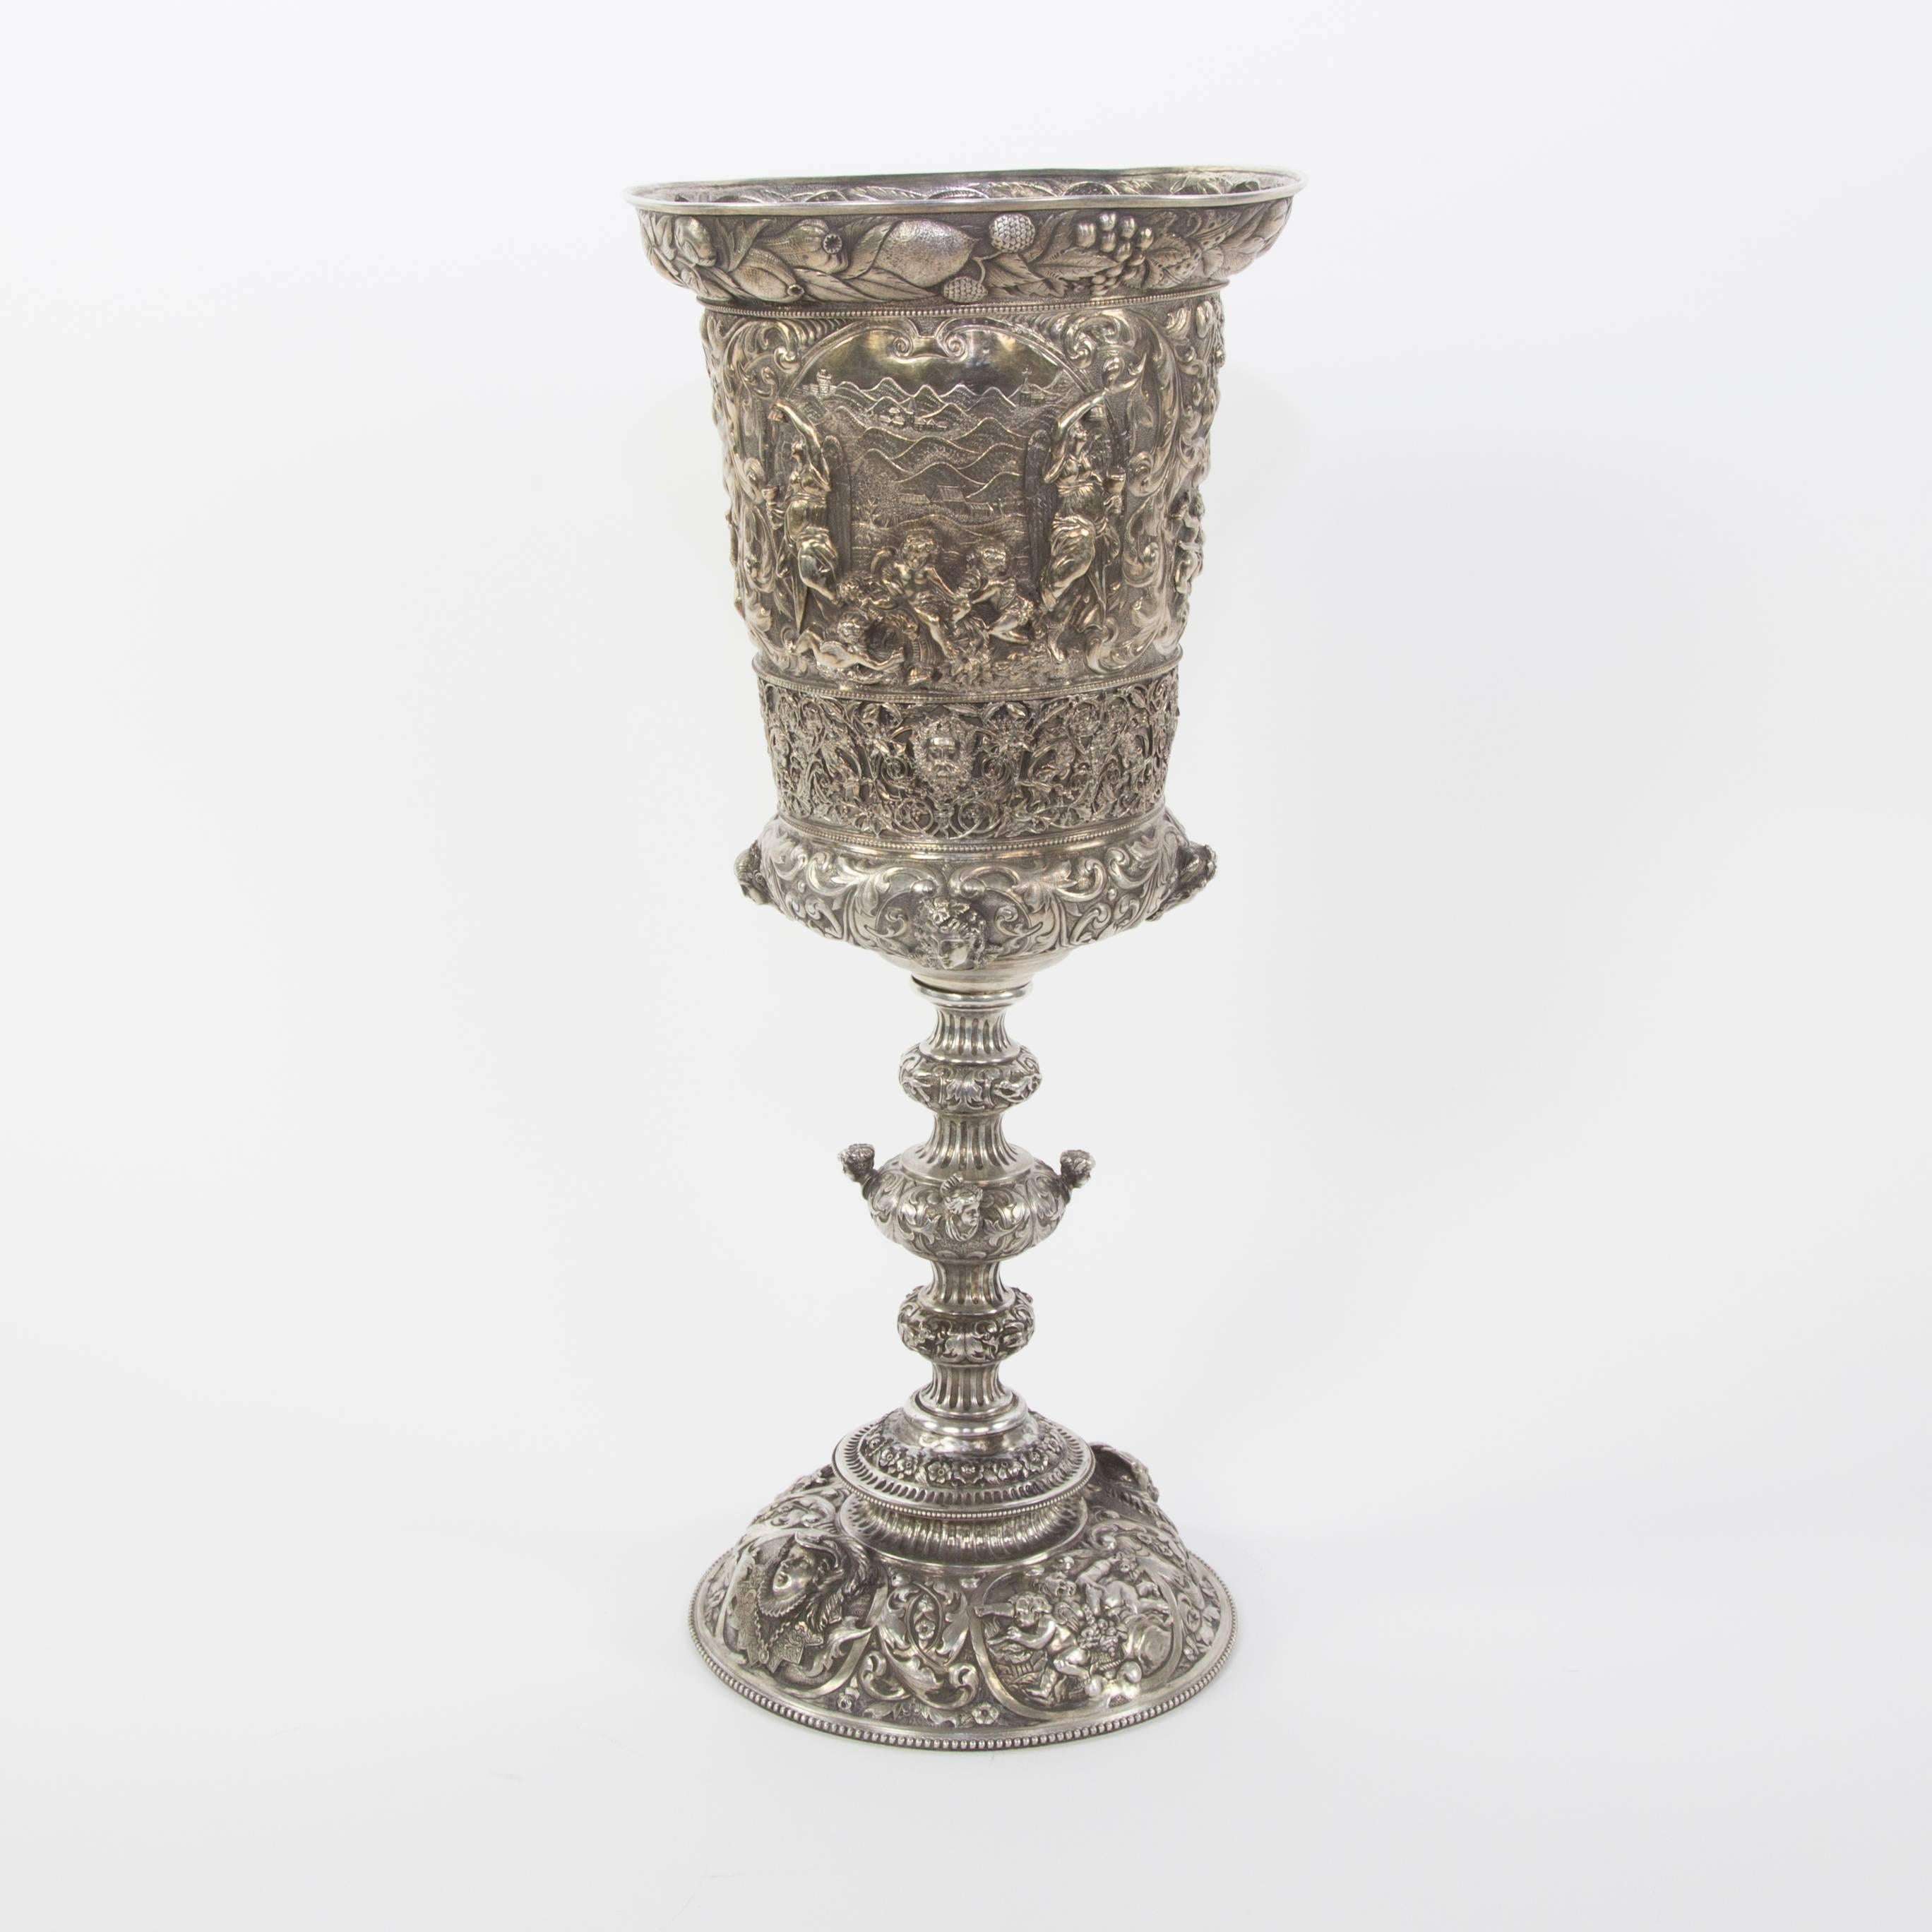 Sensational large silver tiered chalice beautifully handcrafted entirely in silver (800 Silver standard); decorated with motifs in relief, engraved and chased. It is inspired directly in similar pieces influenced by Medieval Germany, in full